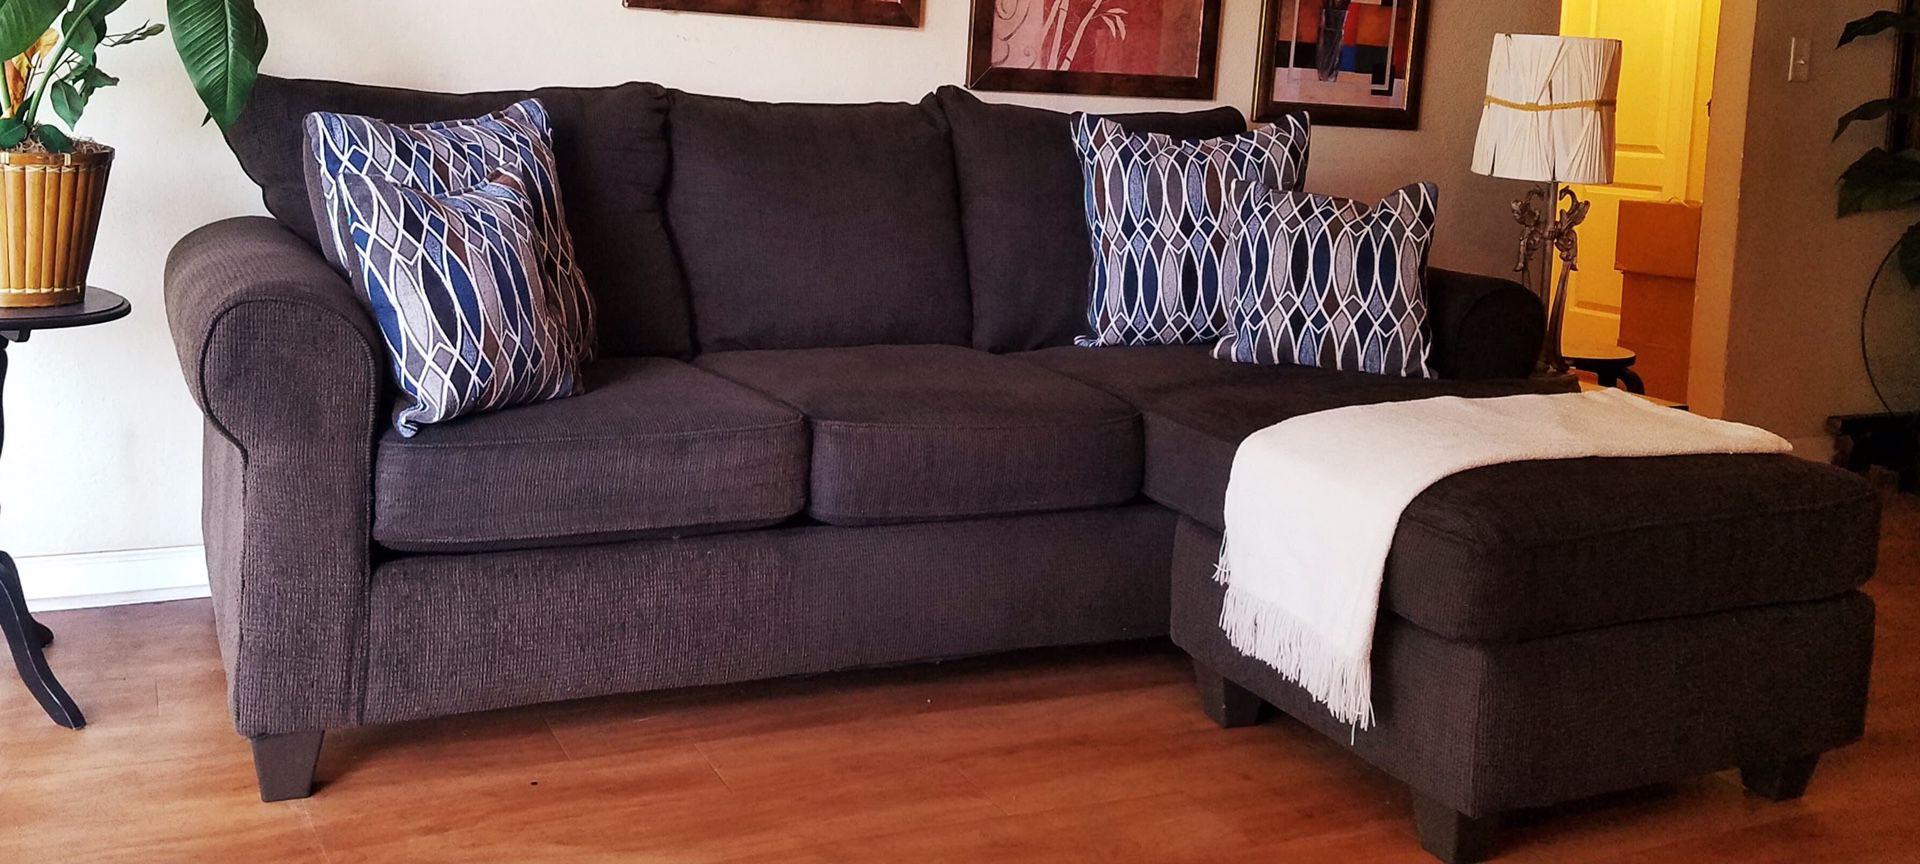 Dark Brown Sectional Sofa in Good Condition. Chaise Can Be Moved to Either Side